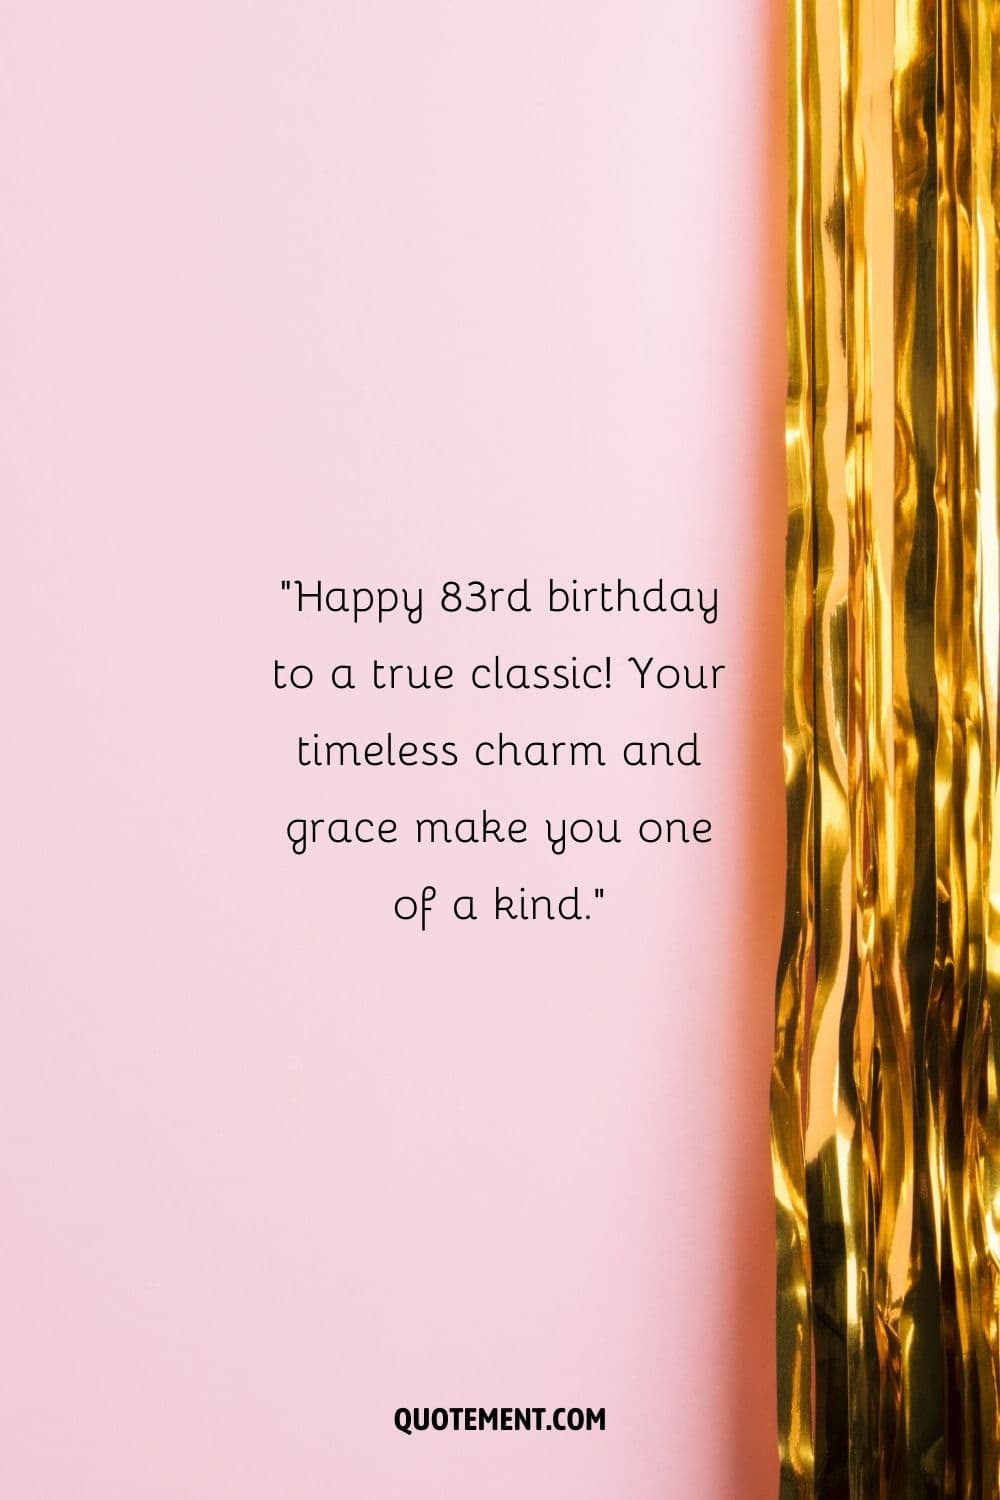 shiny golden foil paper against a light pink backdrop representing a unique happy 83rd birthday wish
